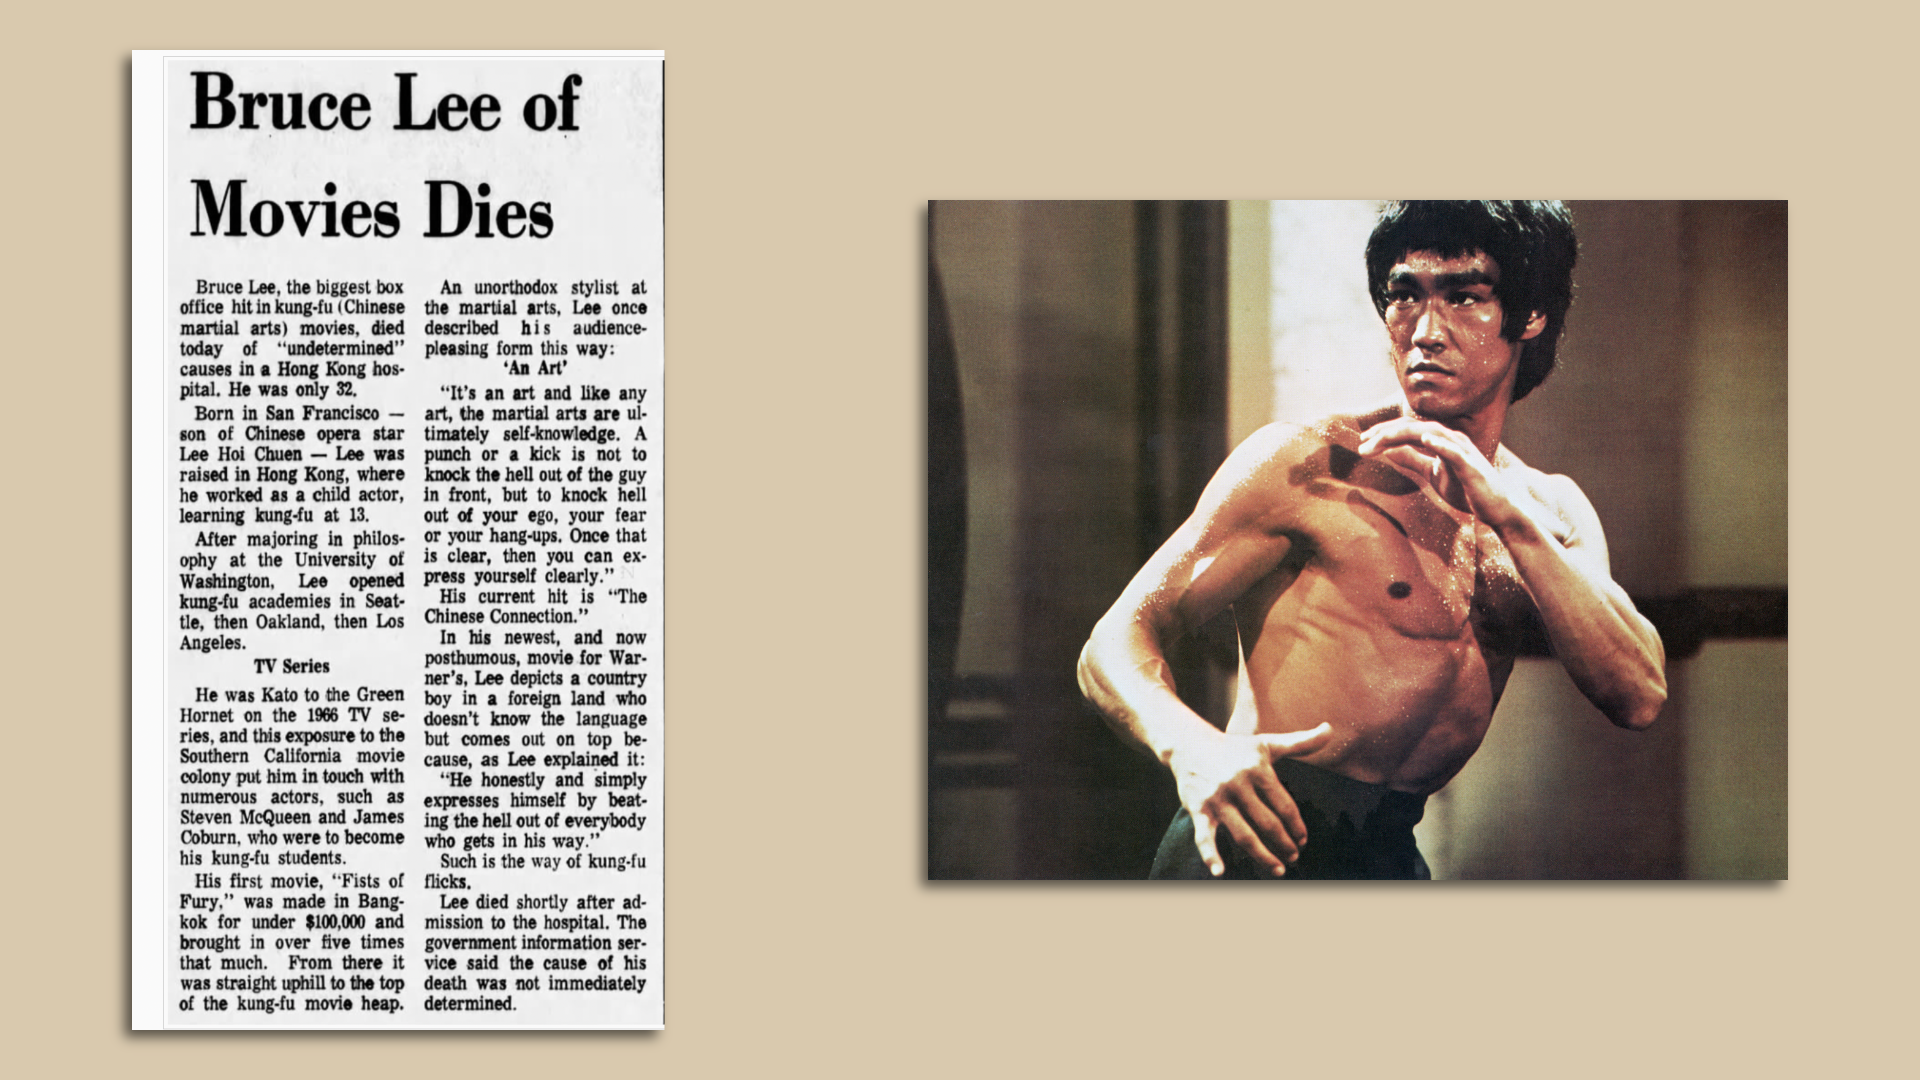 An image of a shirtless Bruce Lee in a martial arts pose. 